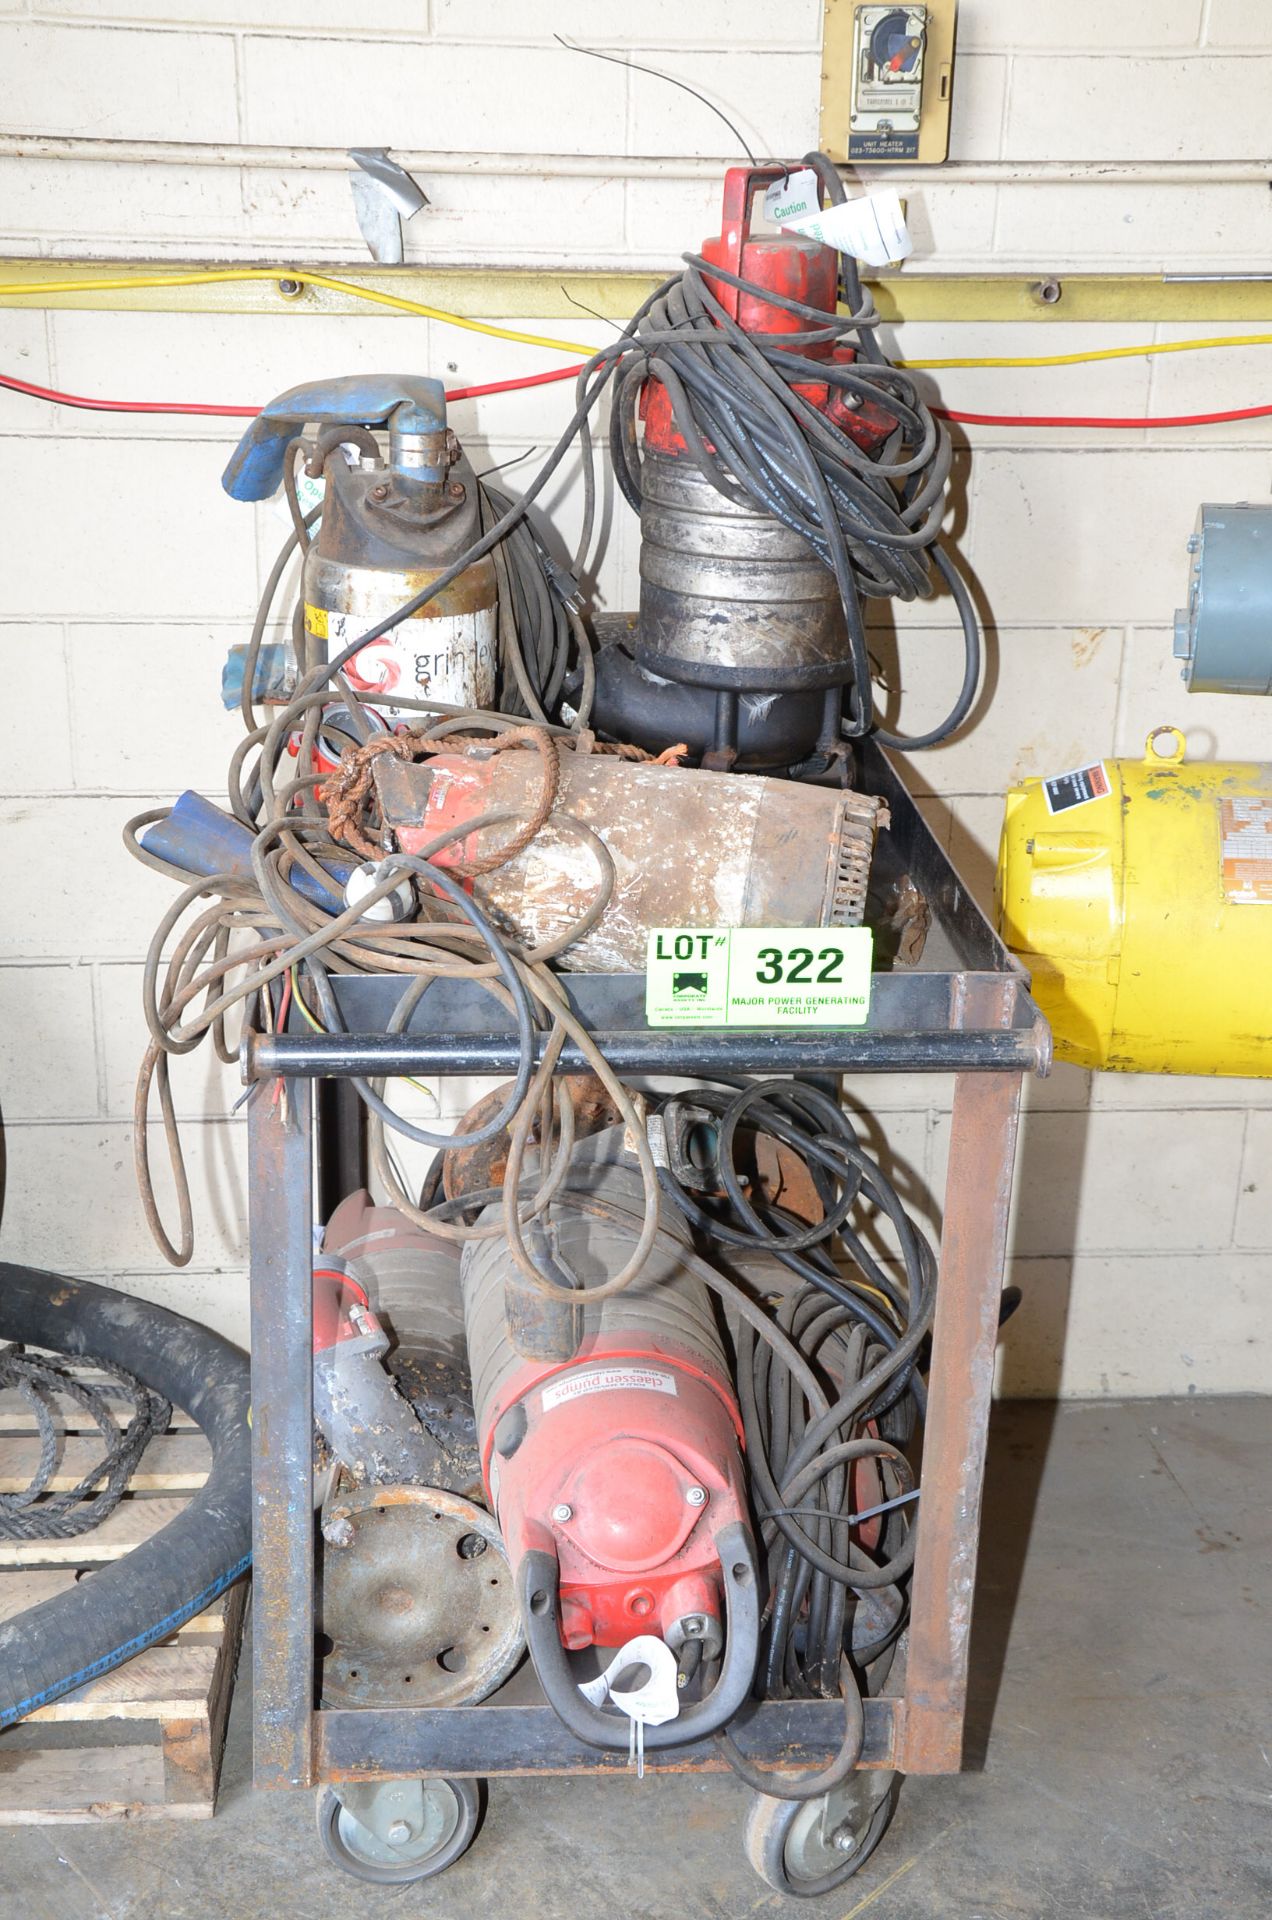 LOT/ HEAVY DUTY SUBMERSIBLE PUMPS WITH CART [RIGGING FEE FOR LOT #322 - $25 USD PLUS APPLICABLE